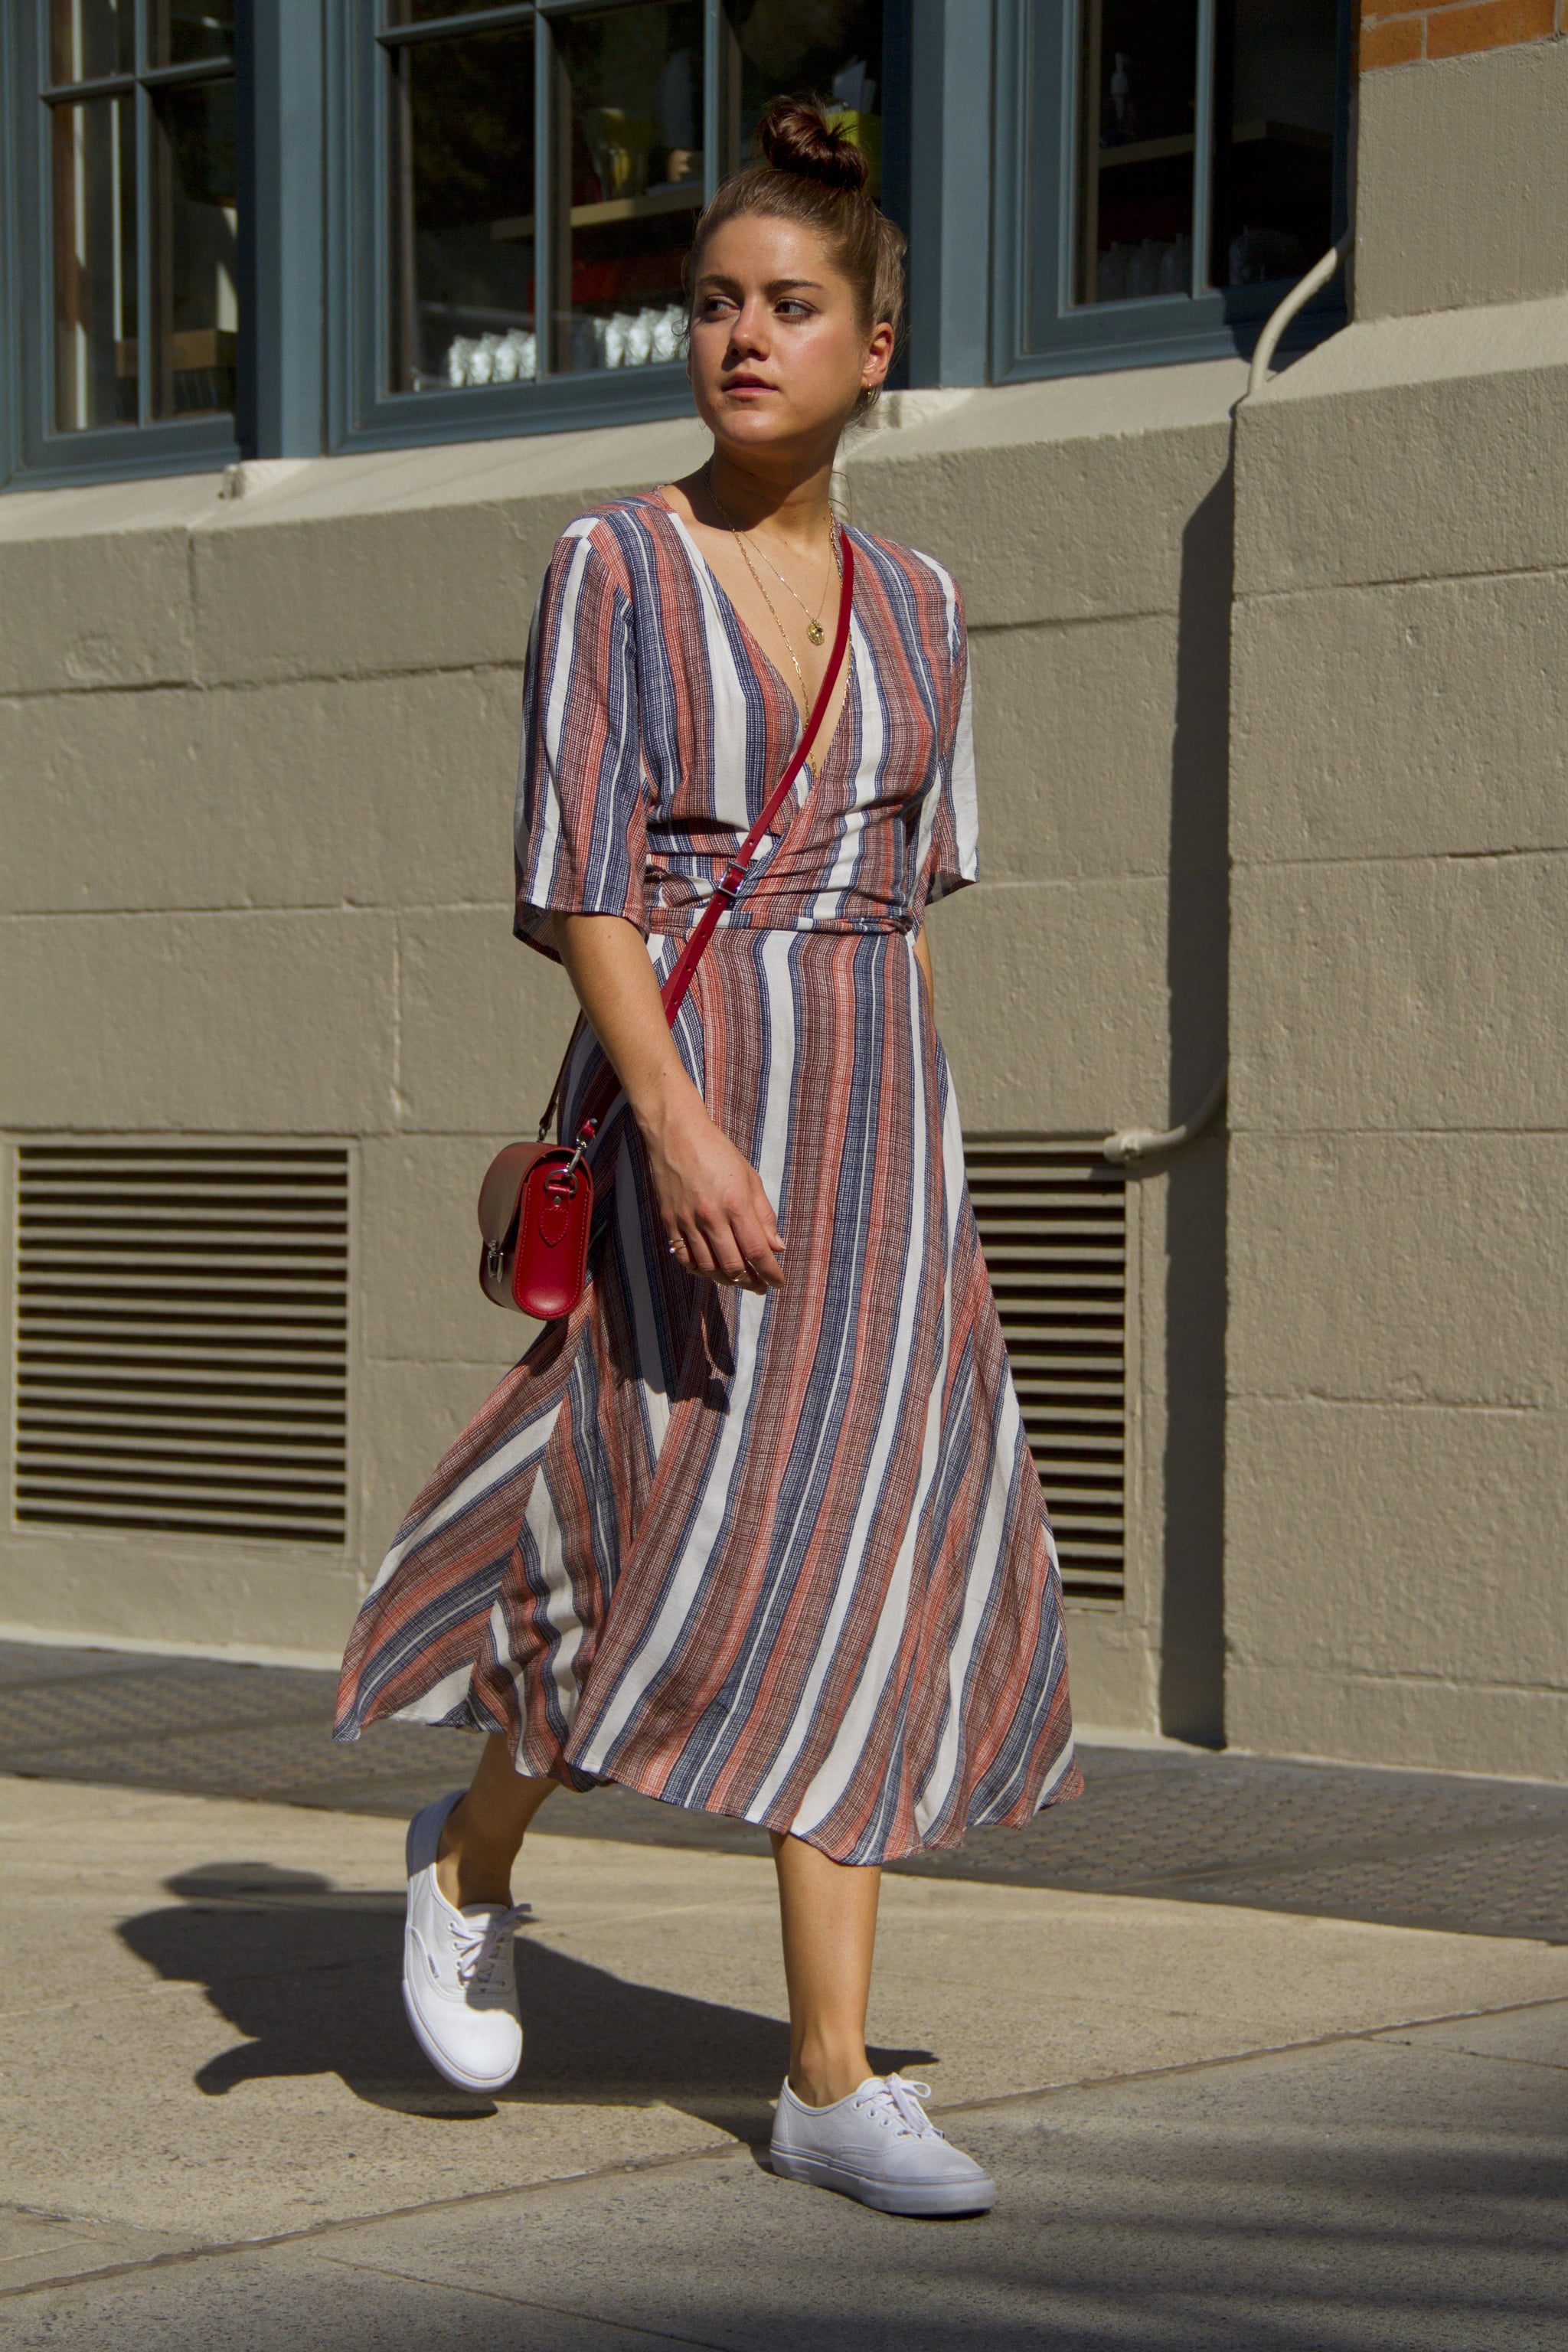 Street style: 13 ways to wear a dress with sneakers this summer